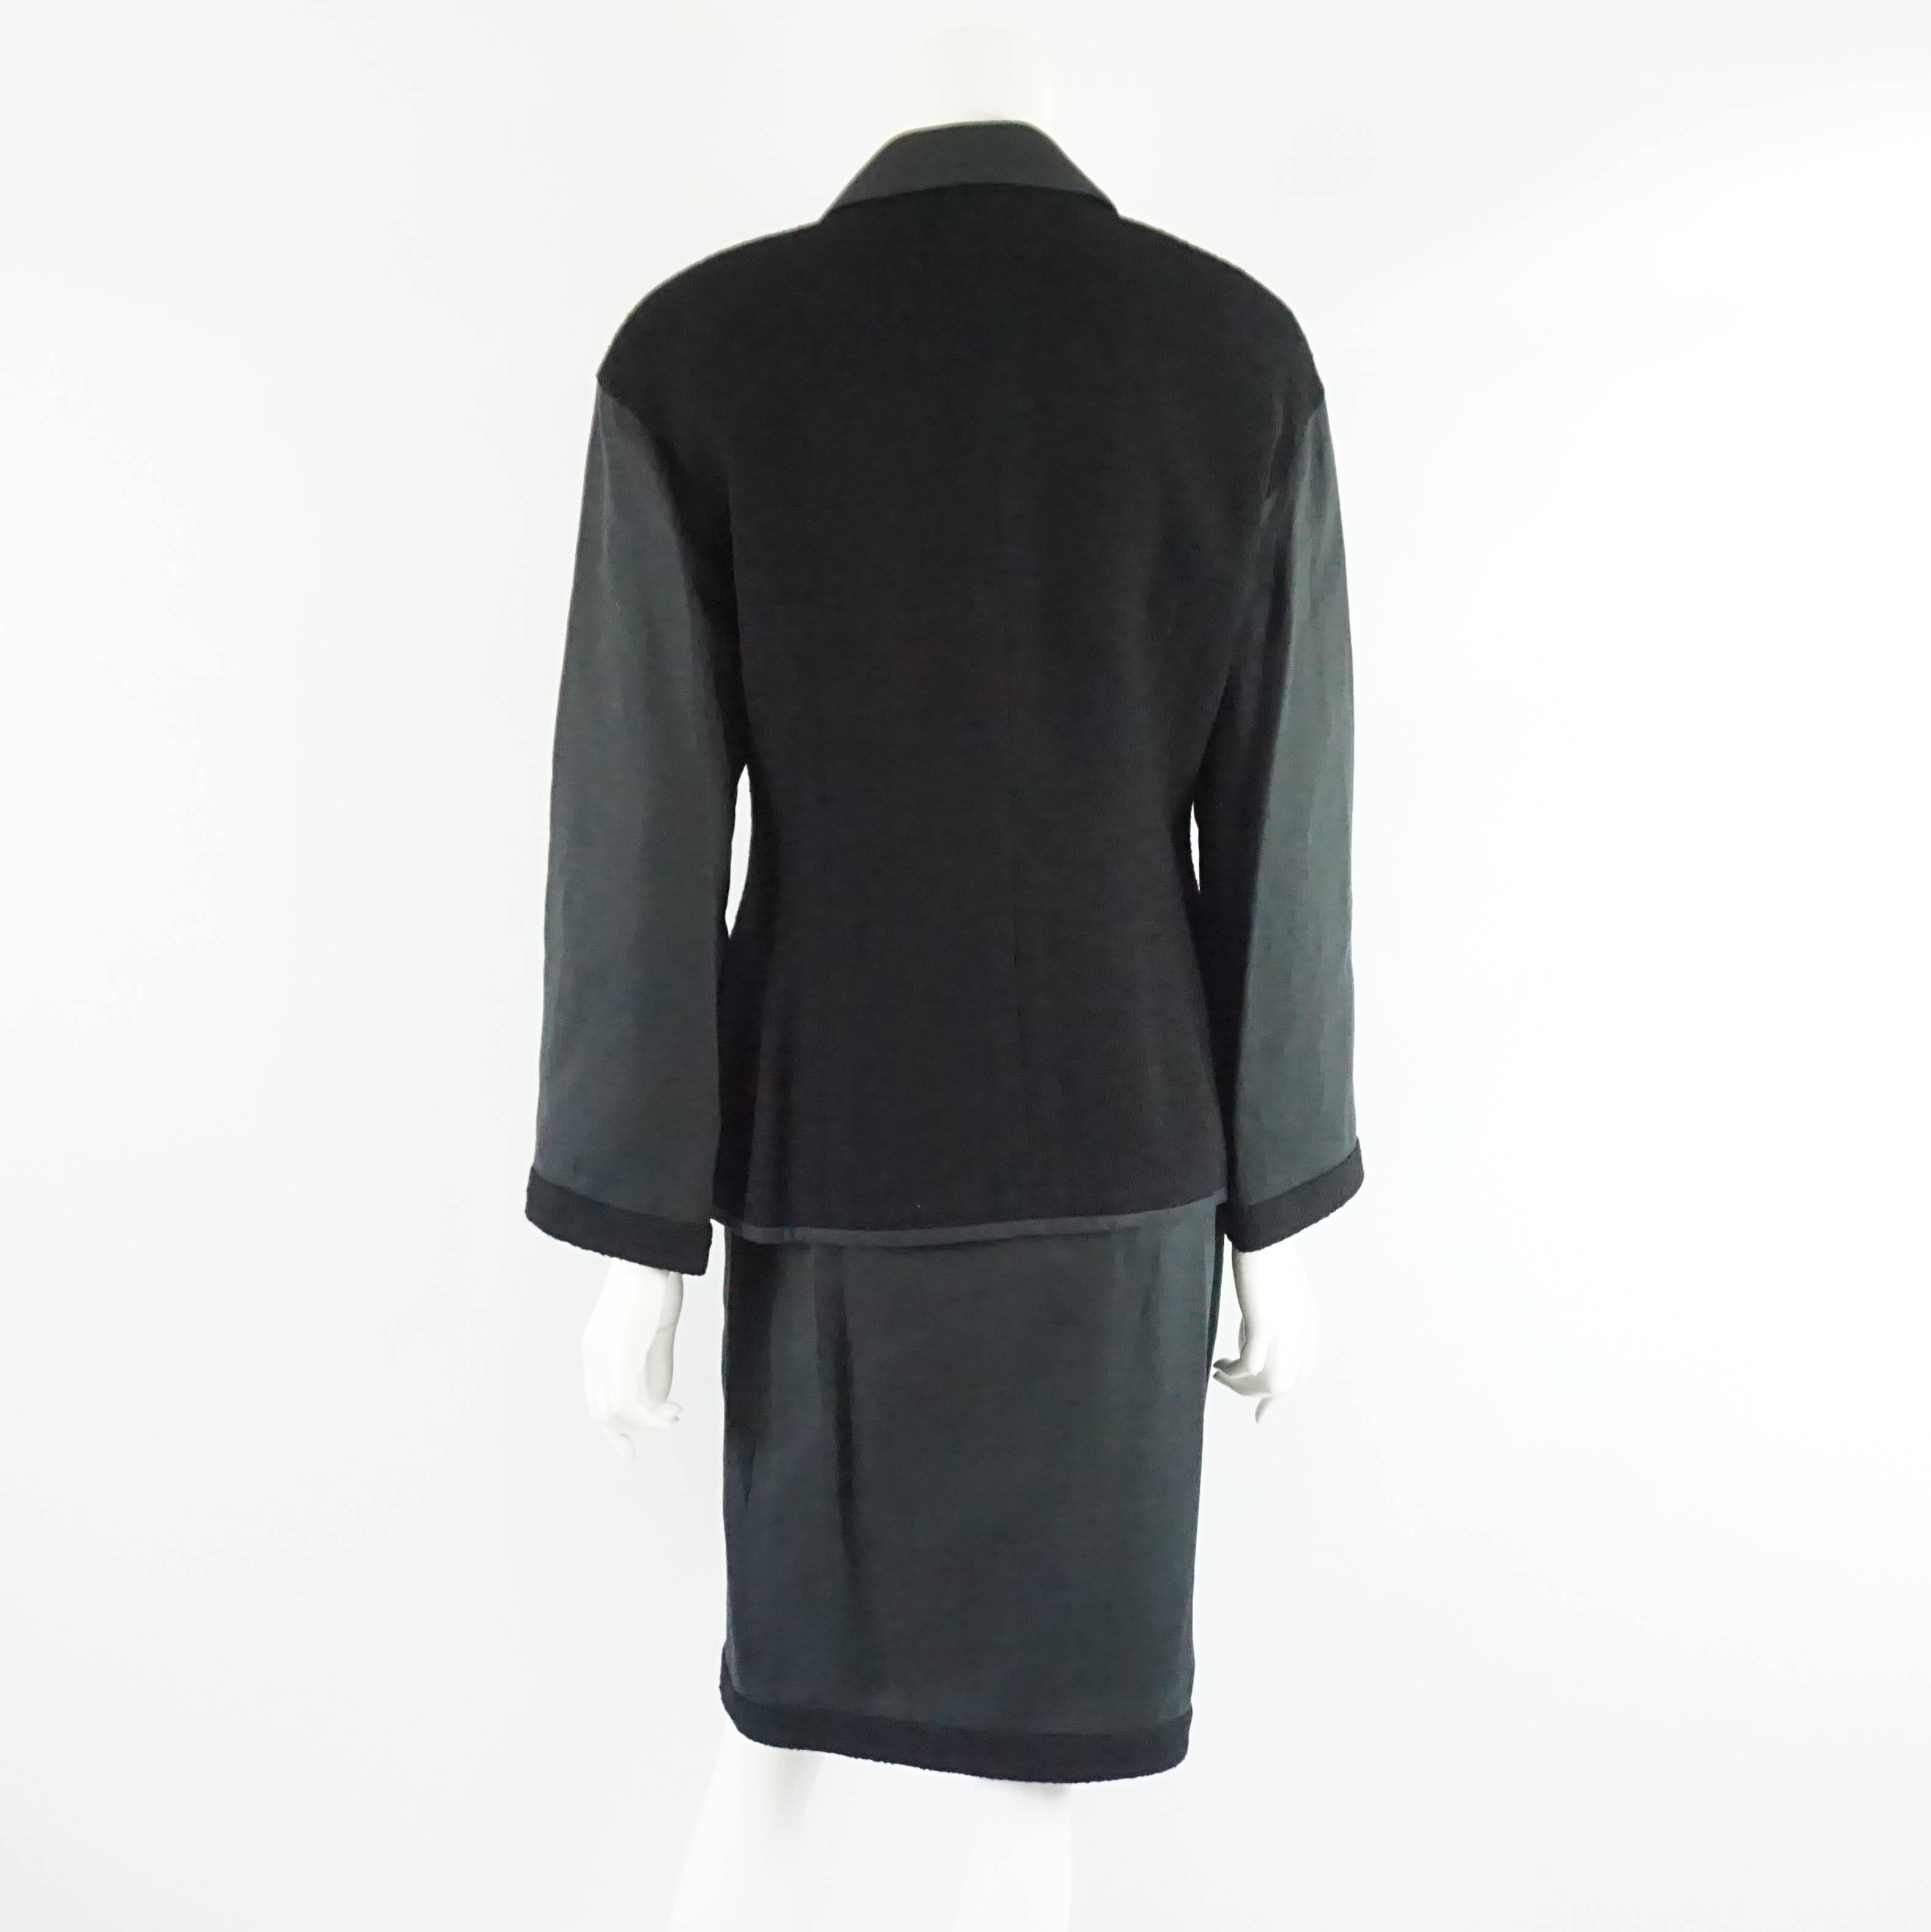 Chanel Spring 1994 Black Linen and Wool Double Breasted Skirt Suit - Size 40 In Good Condition For Sale In West Palm Beach, FL